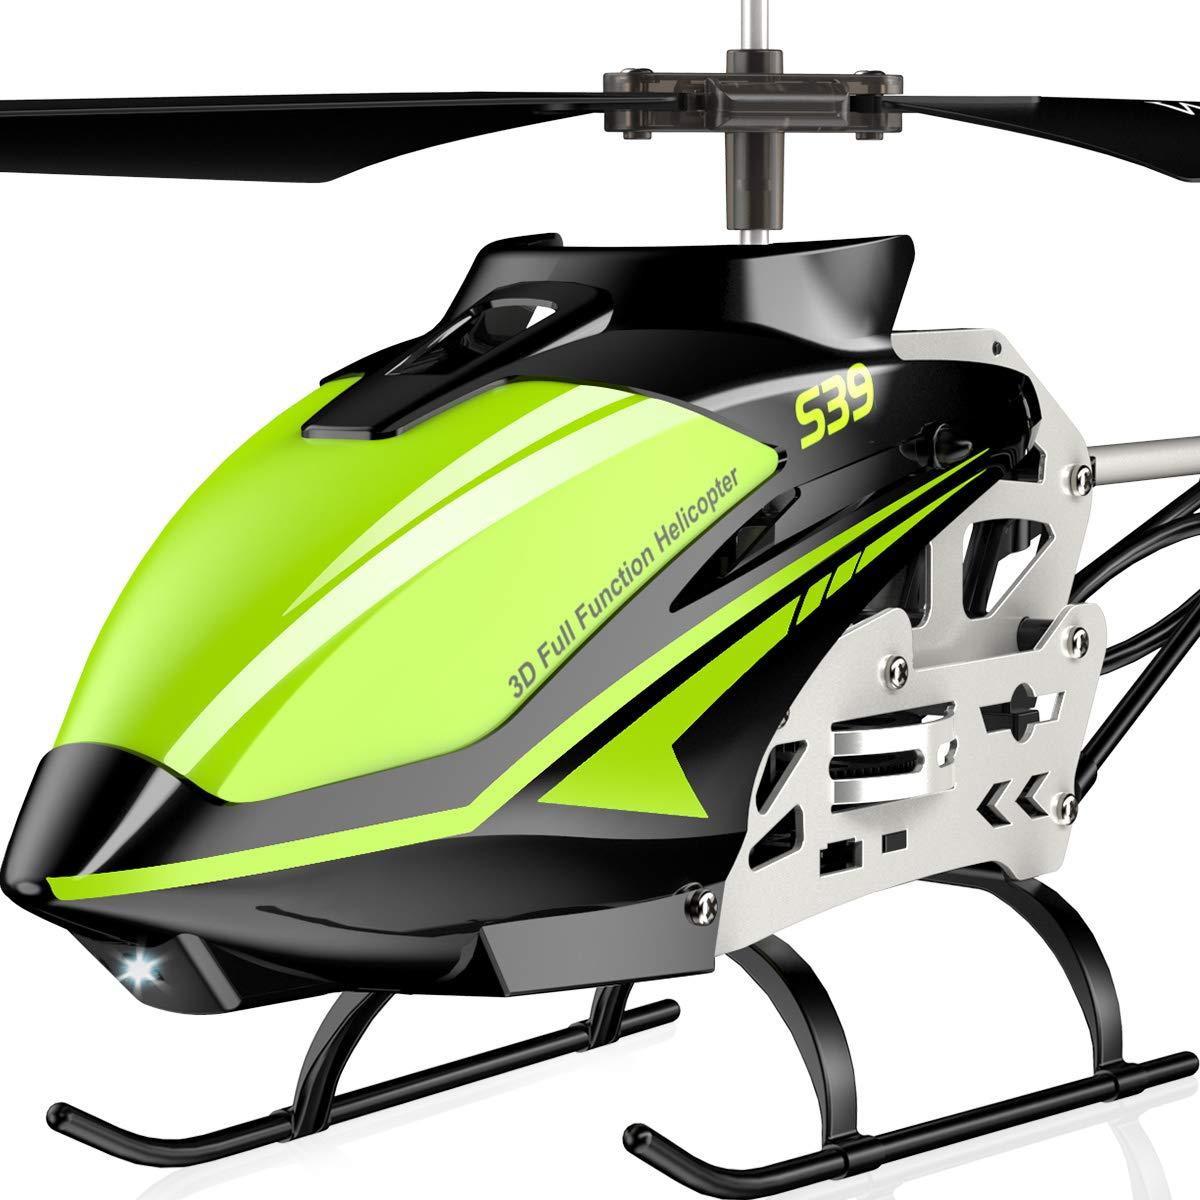 Syma Helicopter With Camera: Positive Customer Feedback for Syma Helicopter with Camera